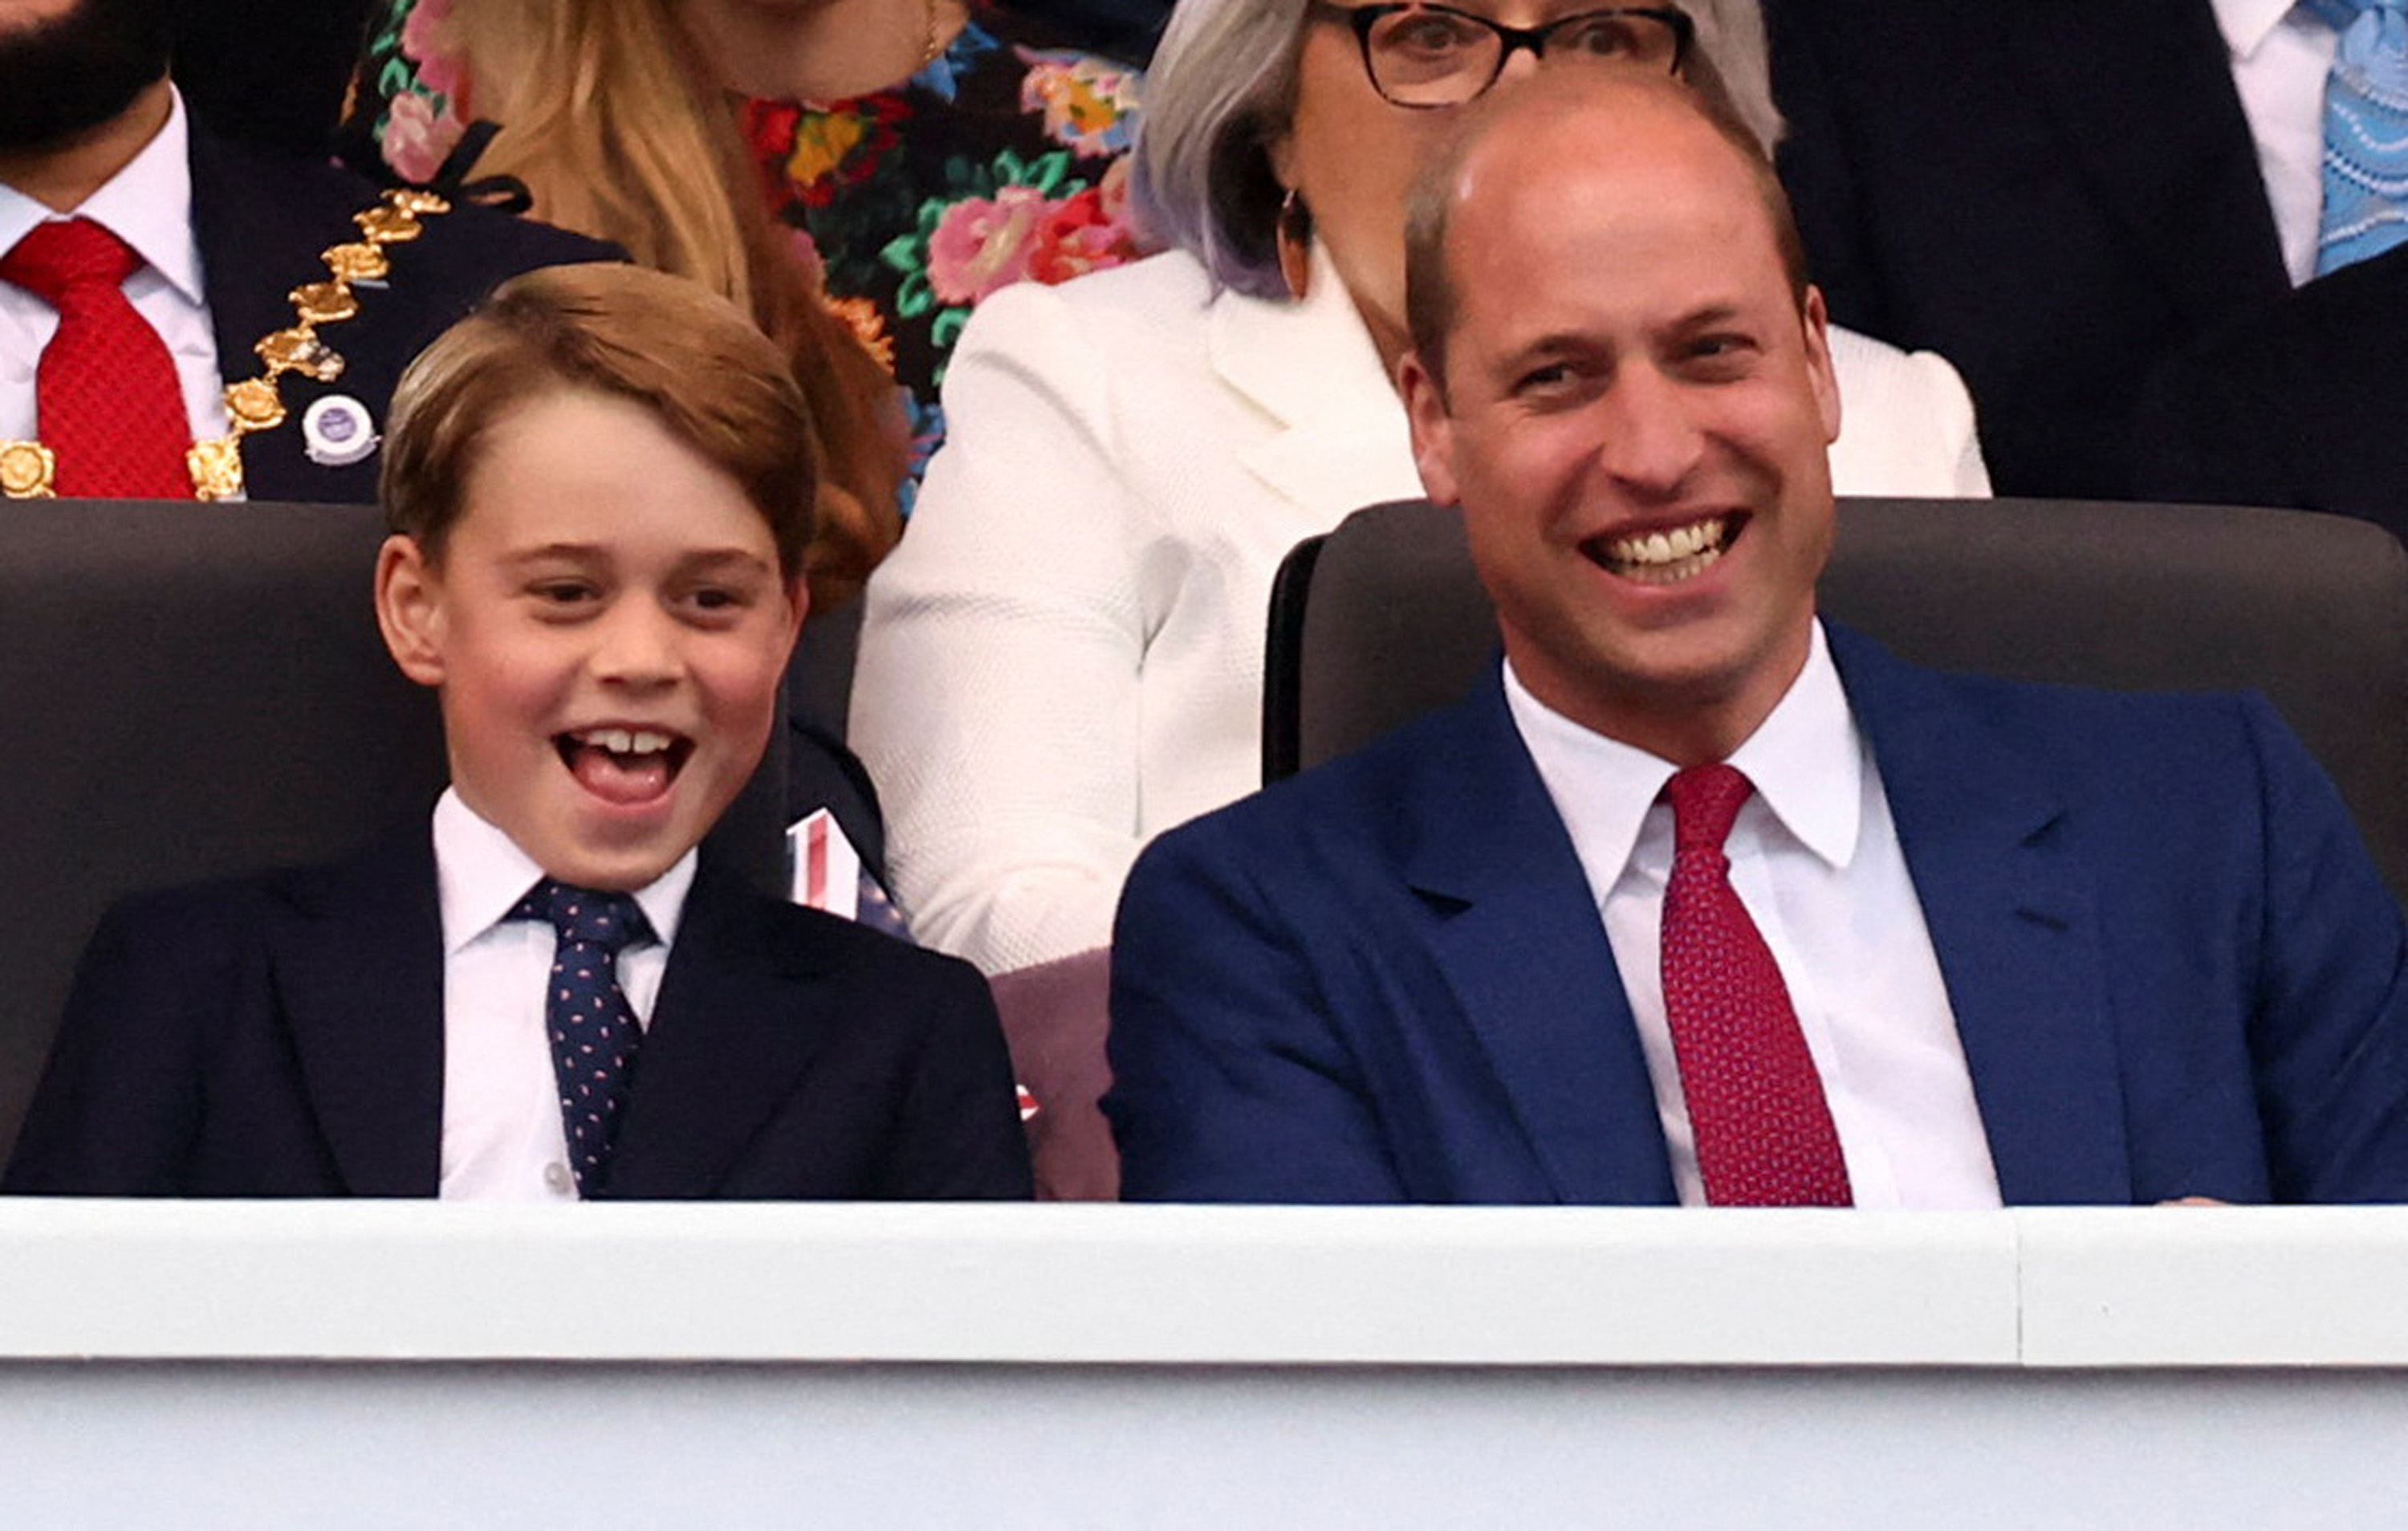 Prince George and Prince William at the platinum party at Buckingham Palace on June 4, 2022, in London, England. | Source: Getty Images